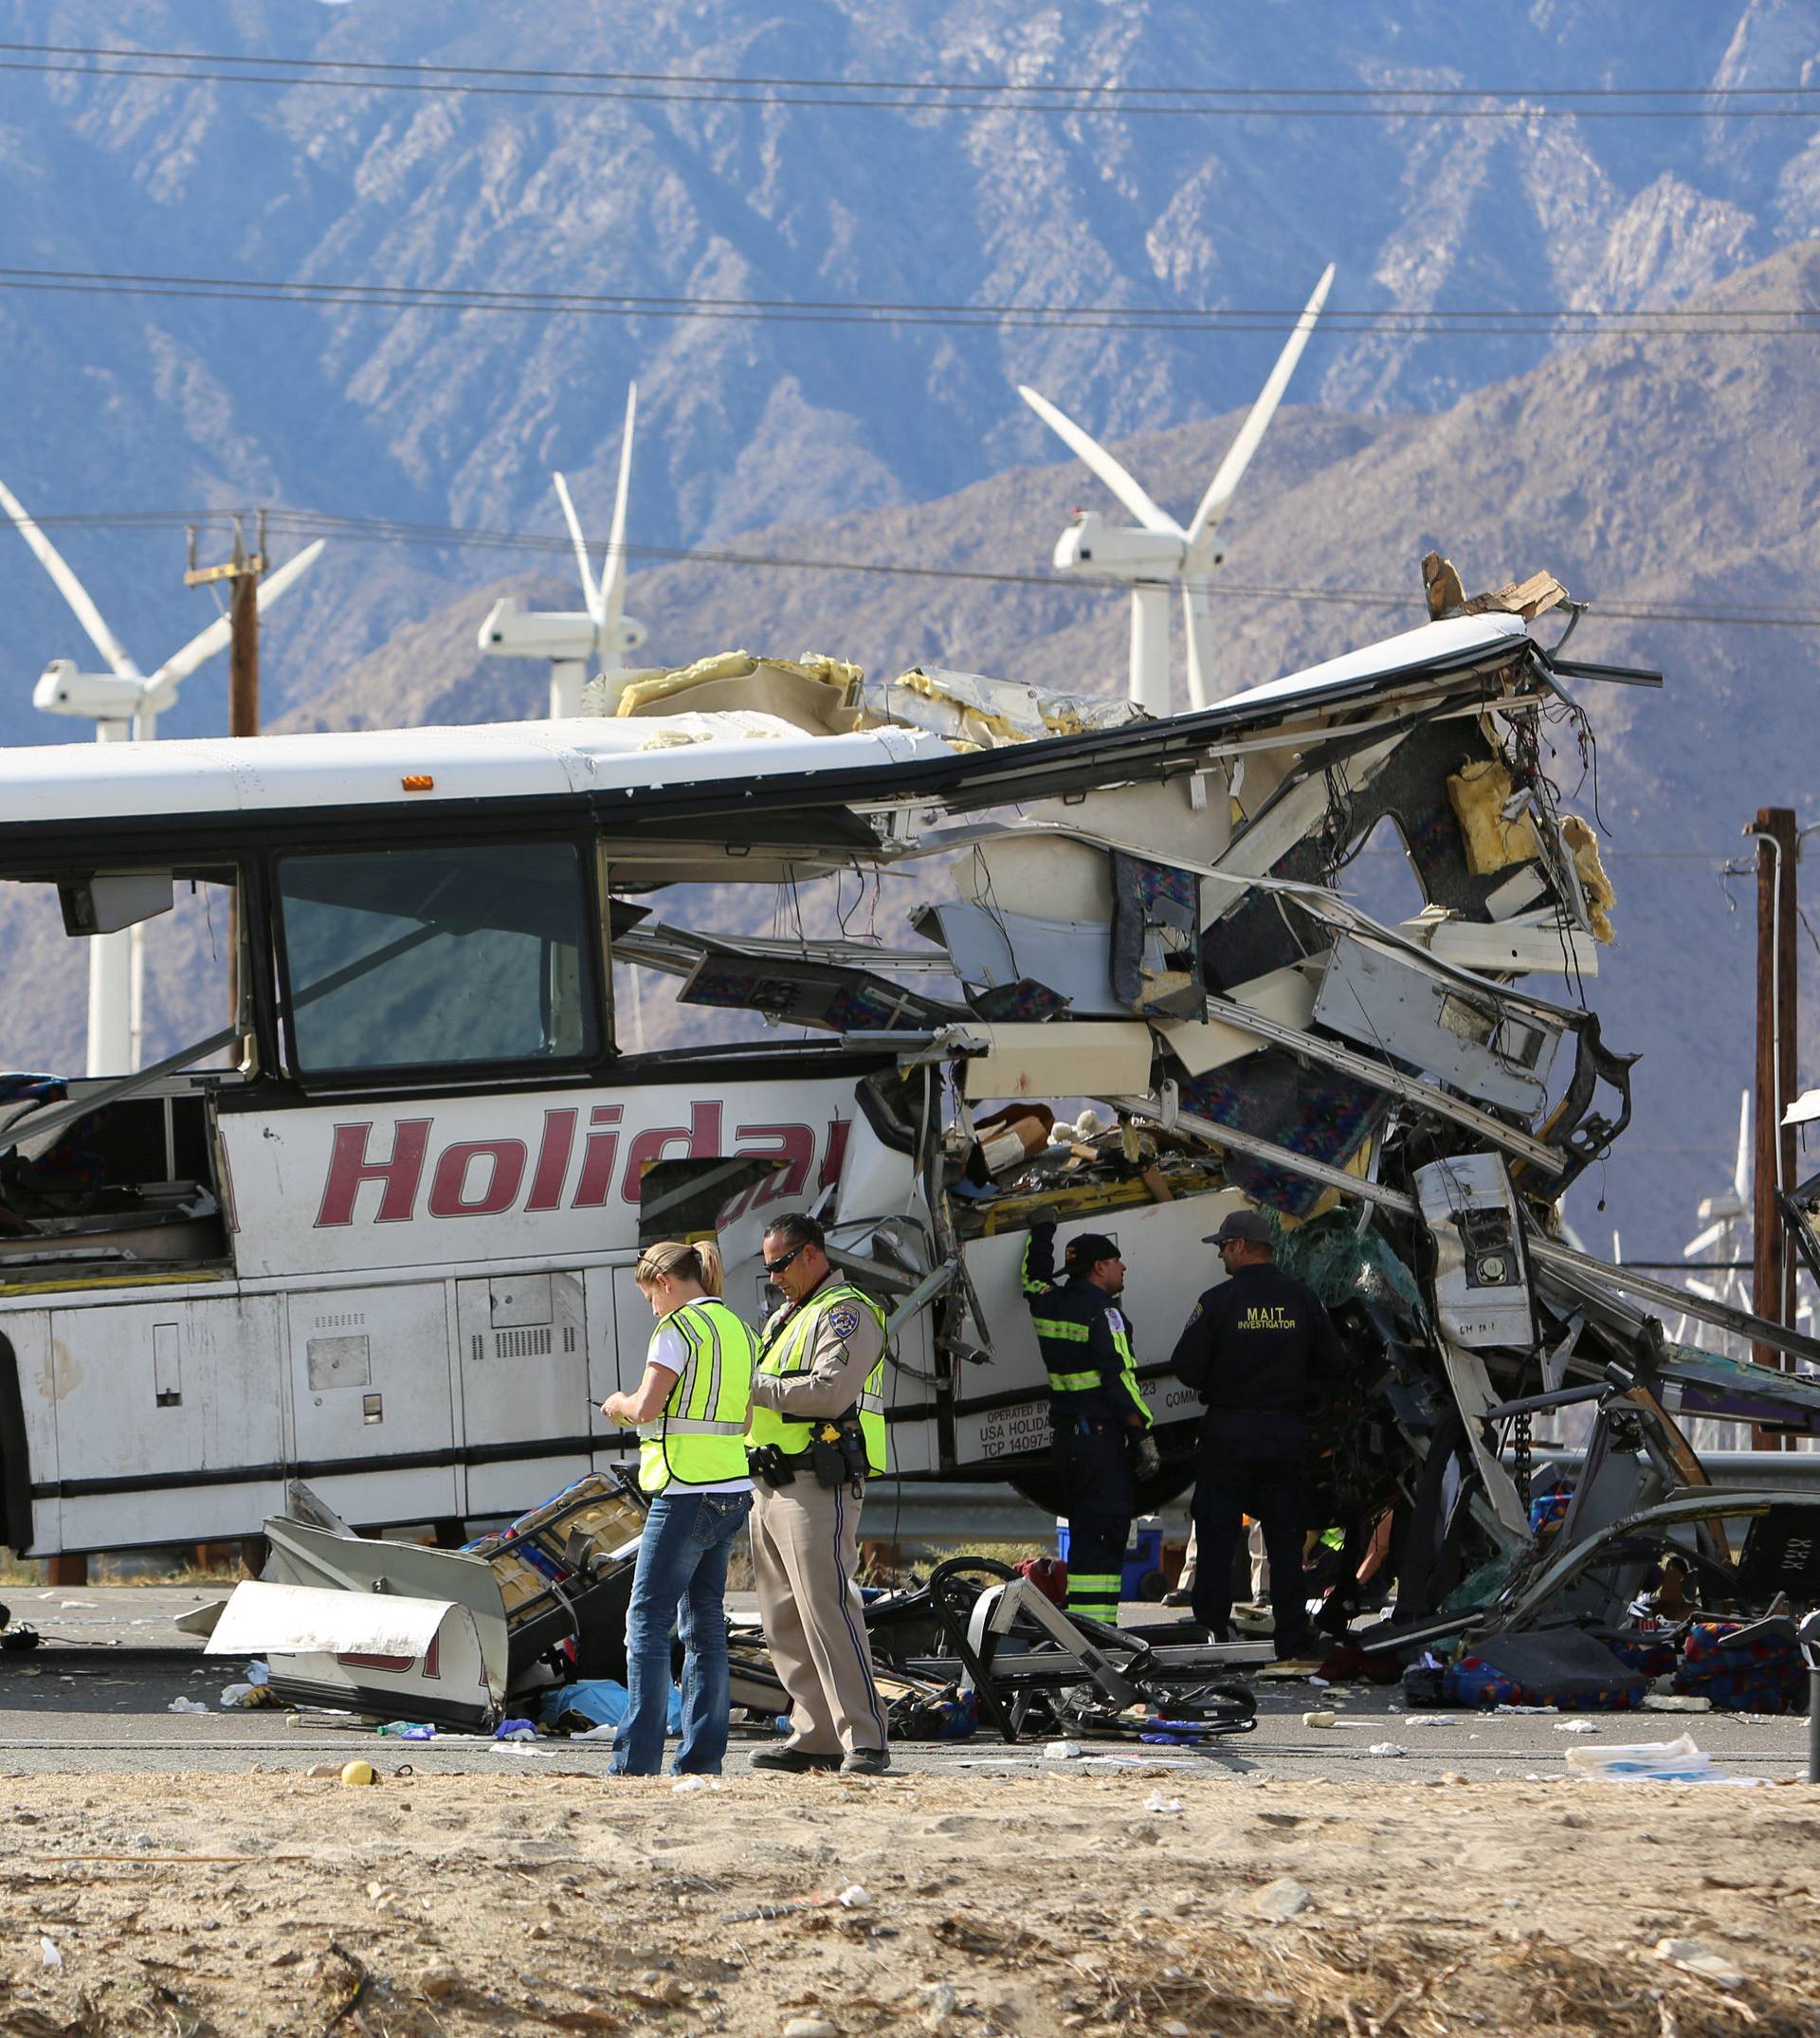 Investigators confer at the scene of a mass casualty bus crash on the westbound Interstate 10 freeway near Palm Springs, California